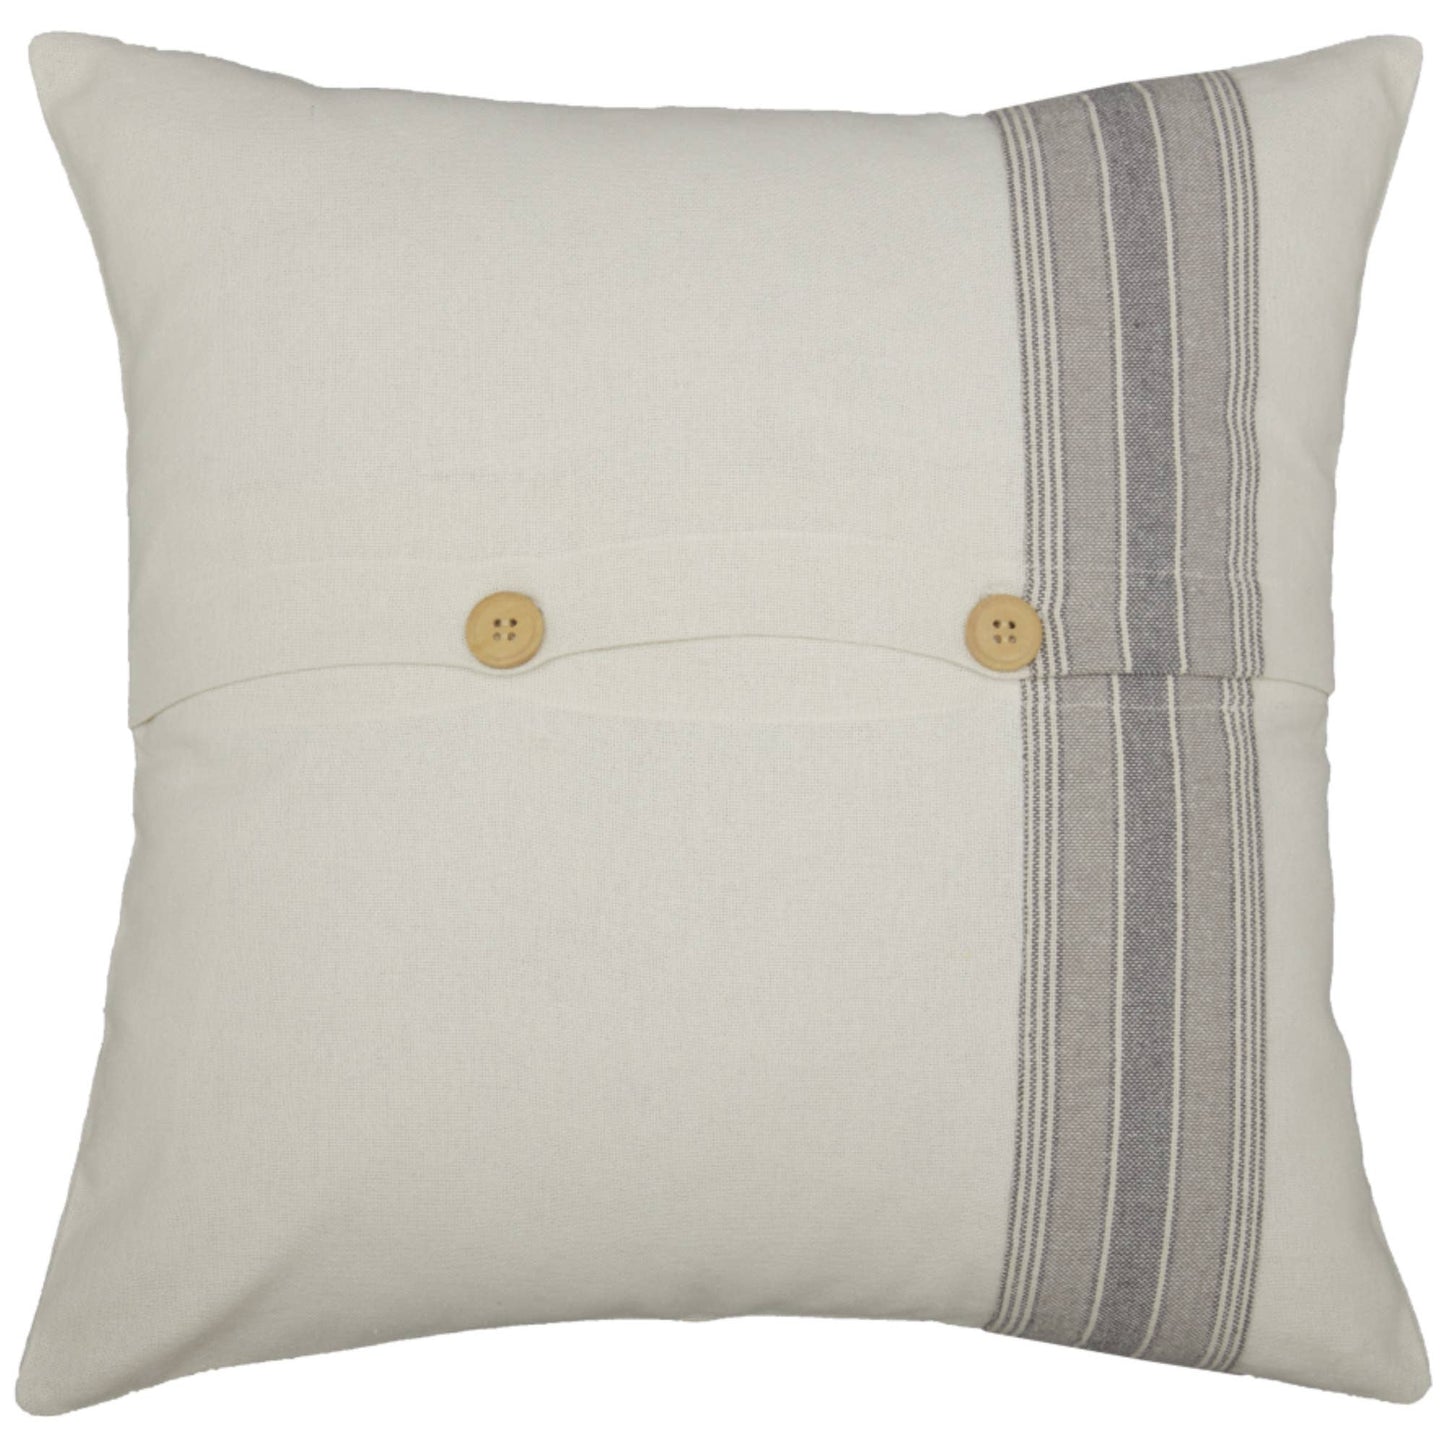 In the Meadow Pillow Cover 20Lx20W